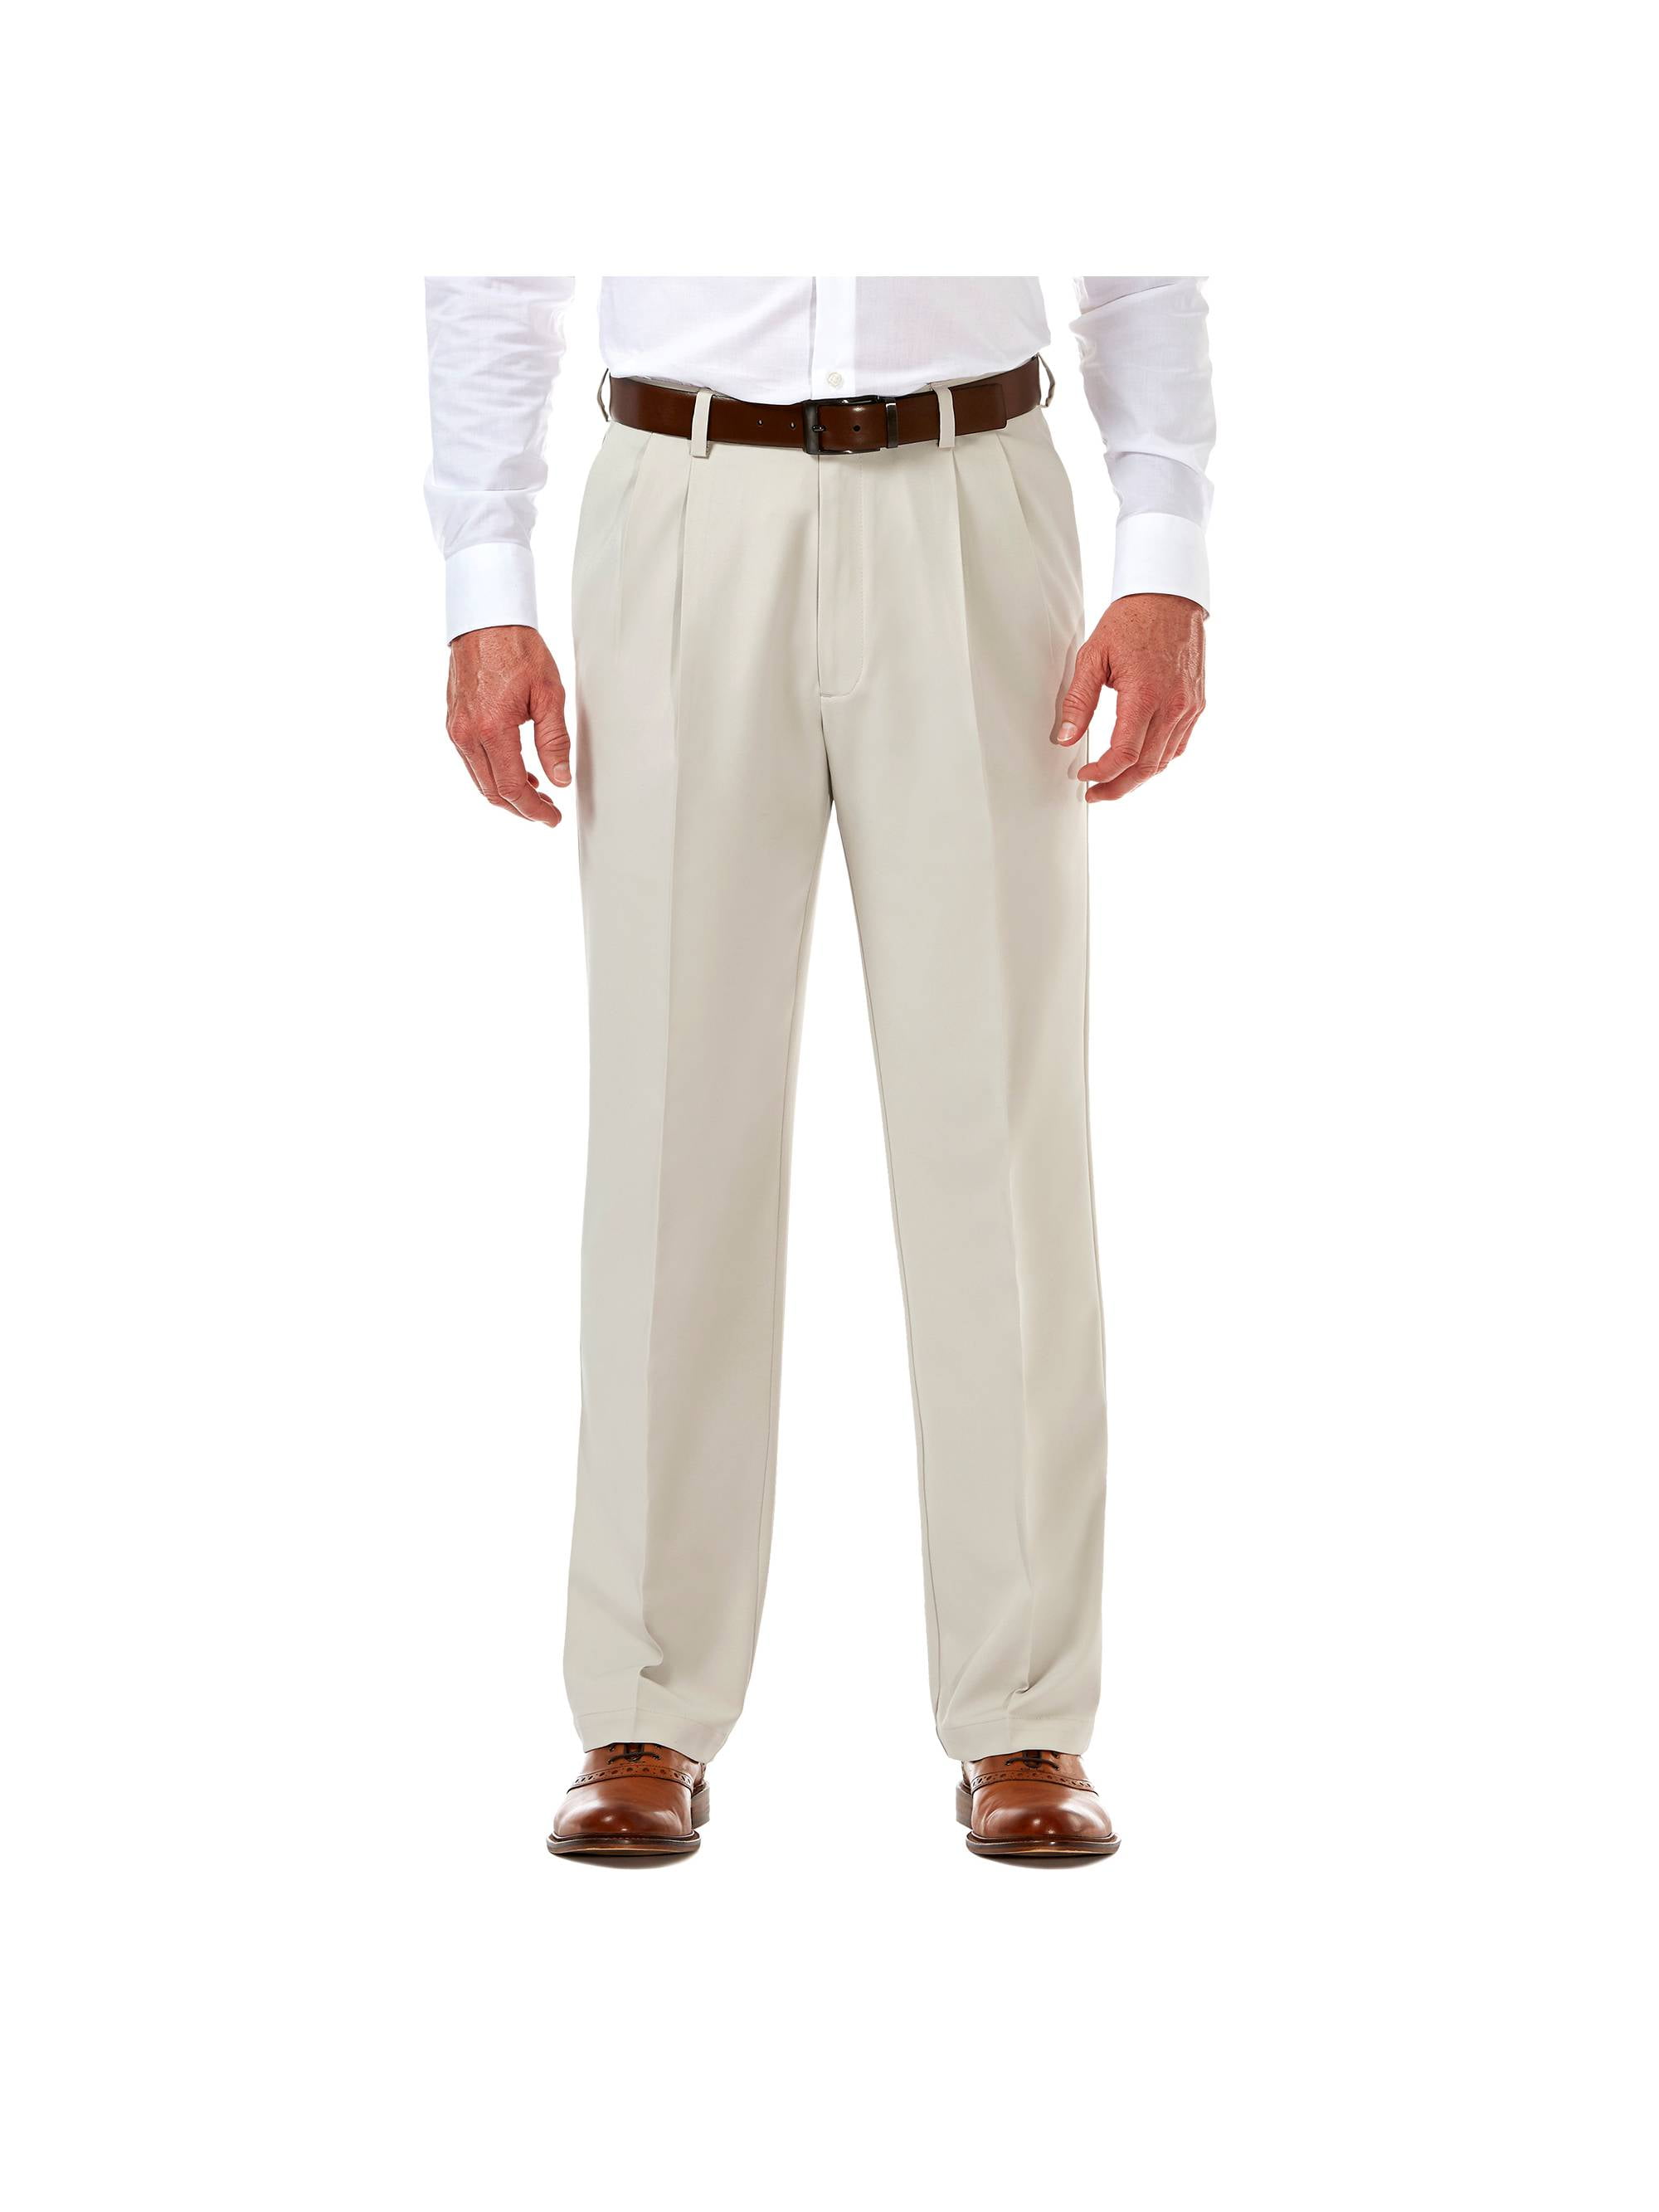 Haggar Mens Big and Tall Cool 18 Pro Classic Fit Pleat Front Pant